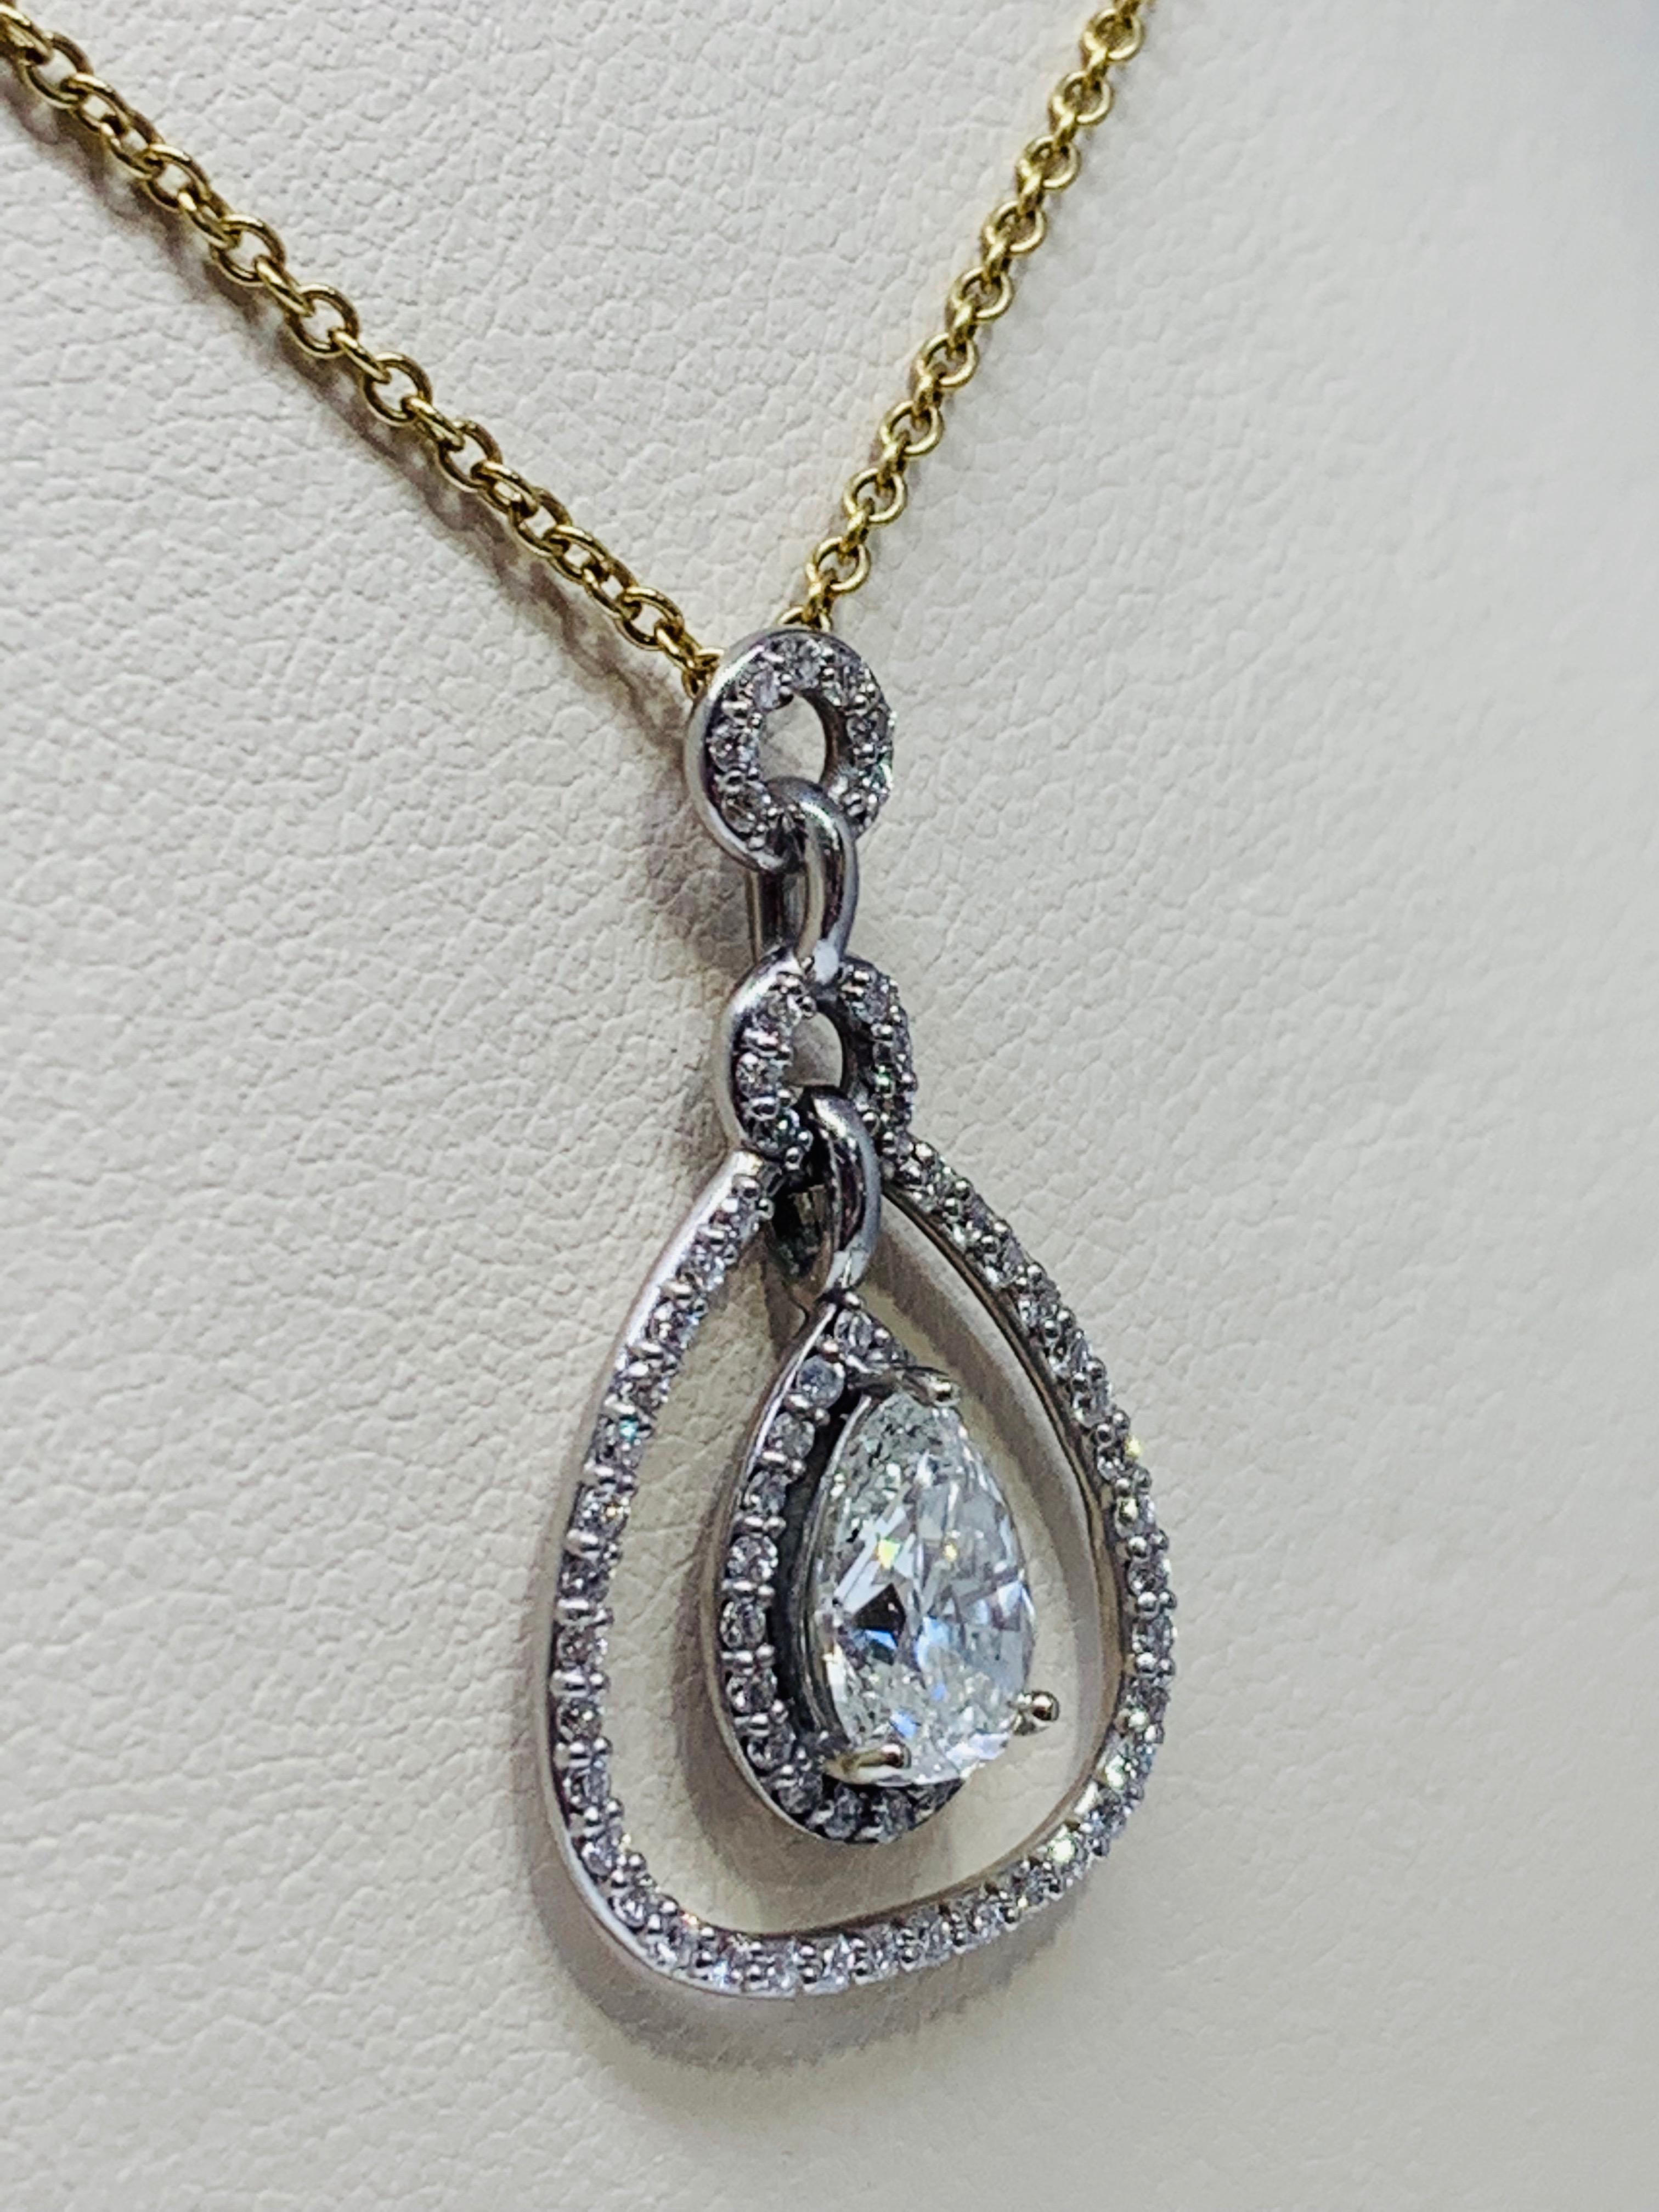 This gorgeous 1.93 carat diamond pendant features a double-halo like design. The pendant itself is set in white gold and includes an 18 inch yellow gold cable chain. The chain can be switched for a 14K white gold cable chain upon request. The center